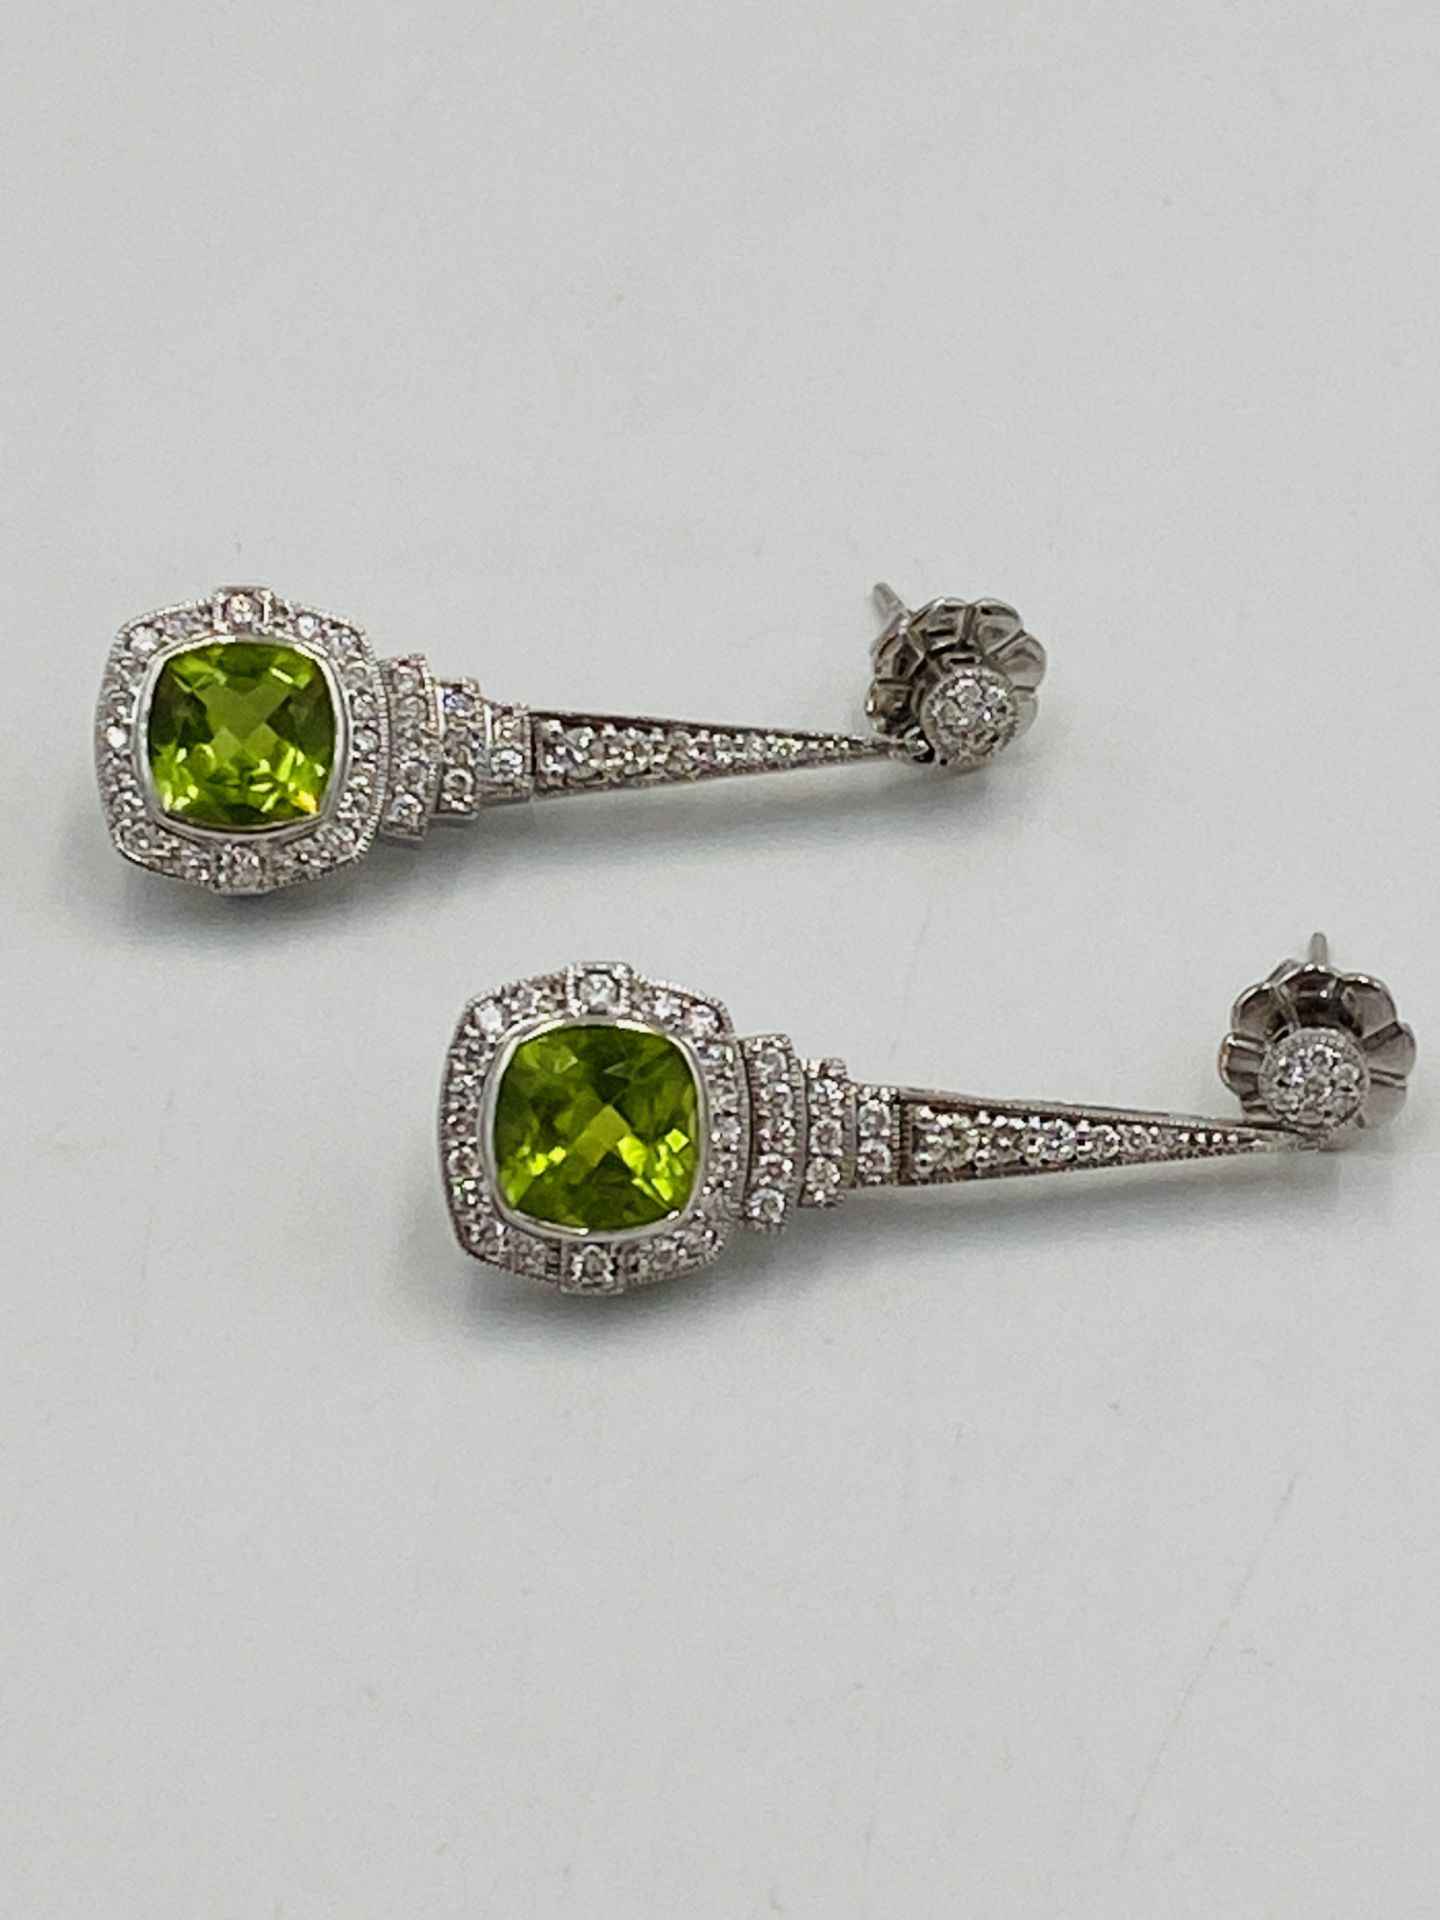 18ct white gold, diamond and green stone drop earrings - Image 2 of 8